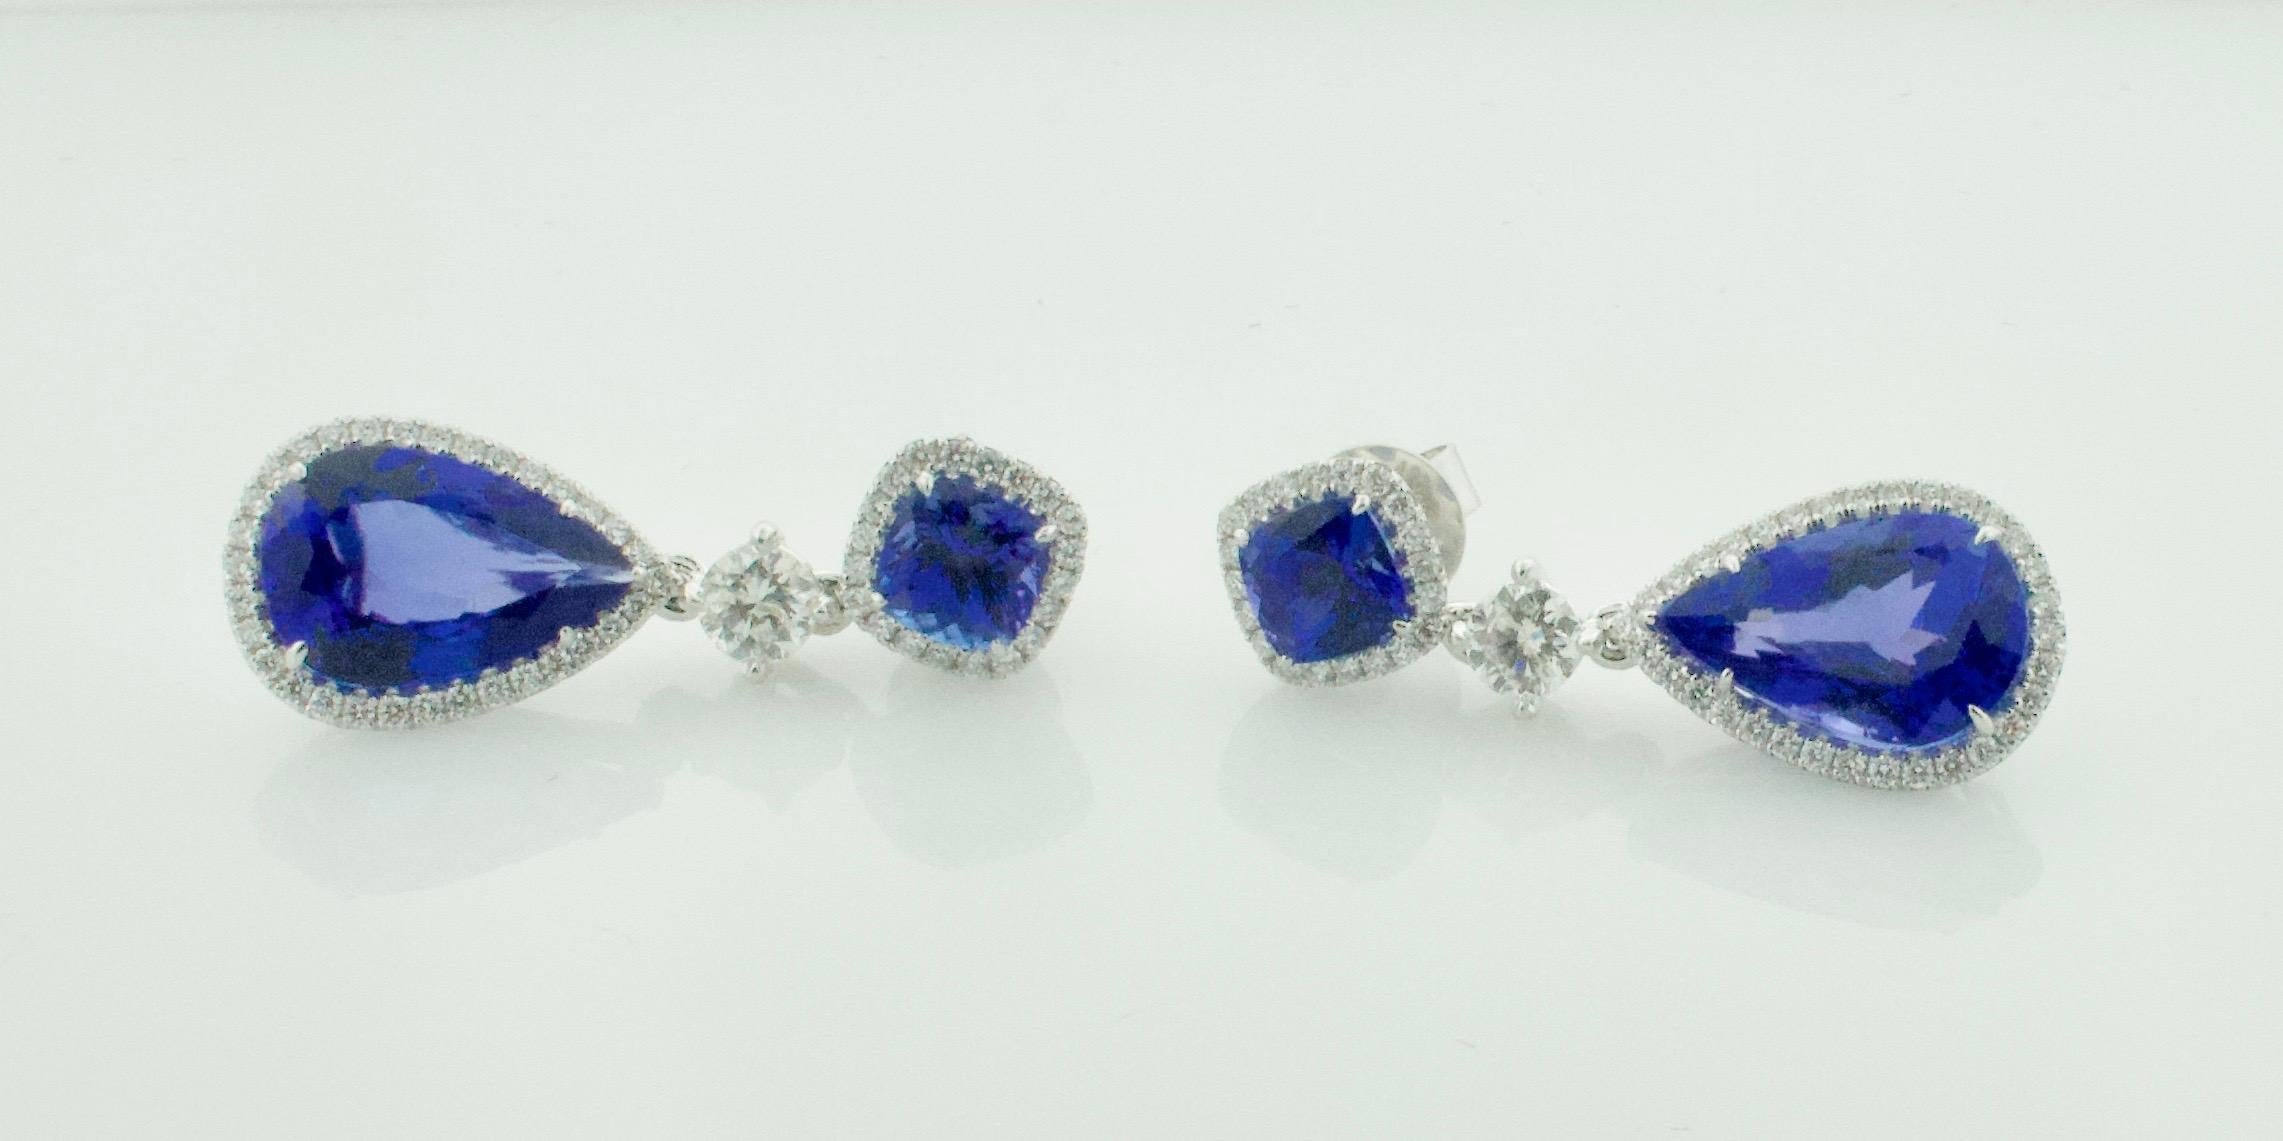 Gorgeous Tanzanite and Diamond Dangling Earrings in 18k For Sale 3